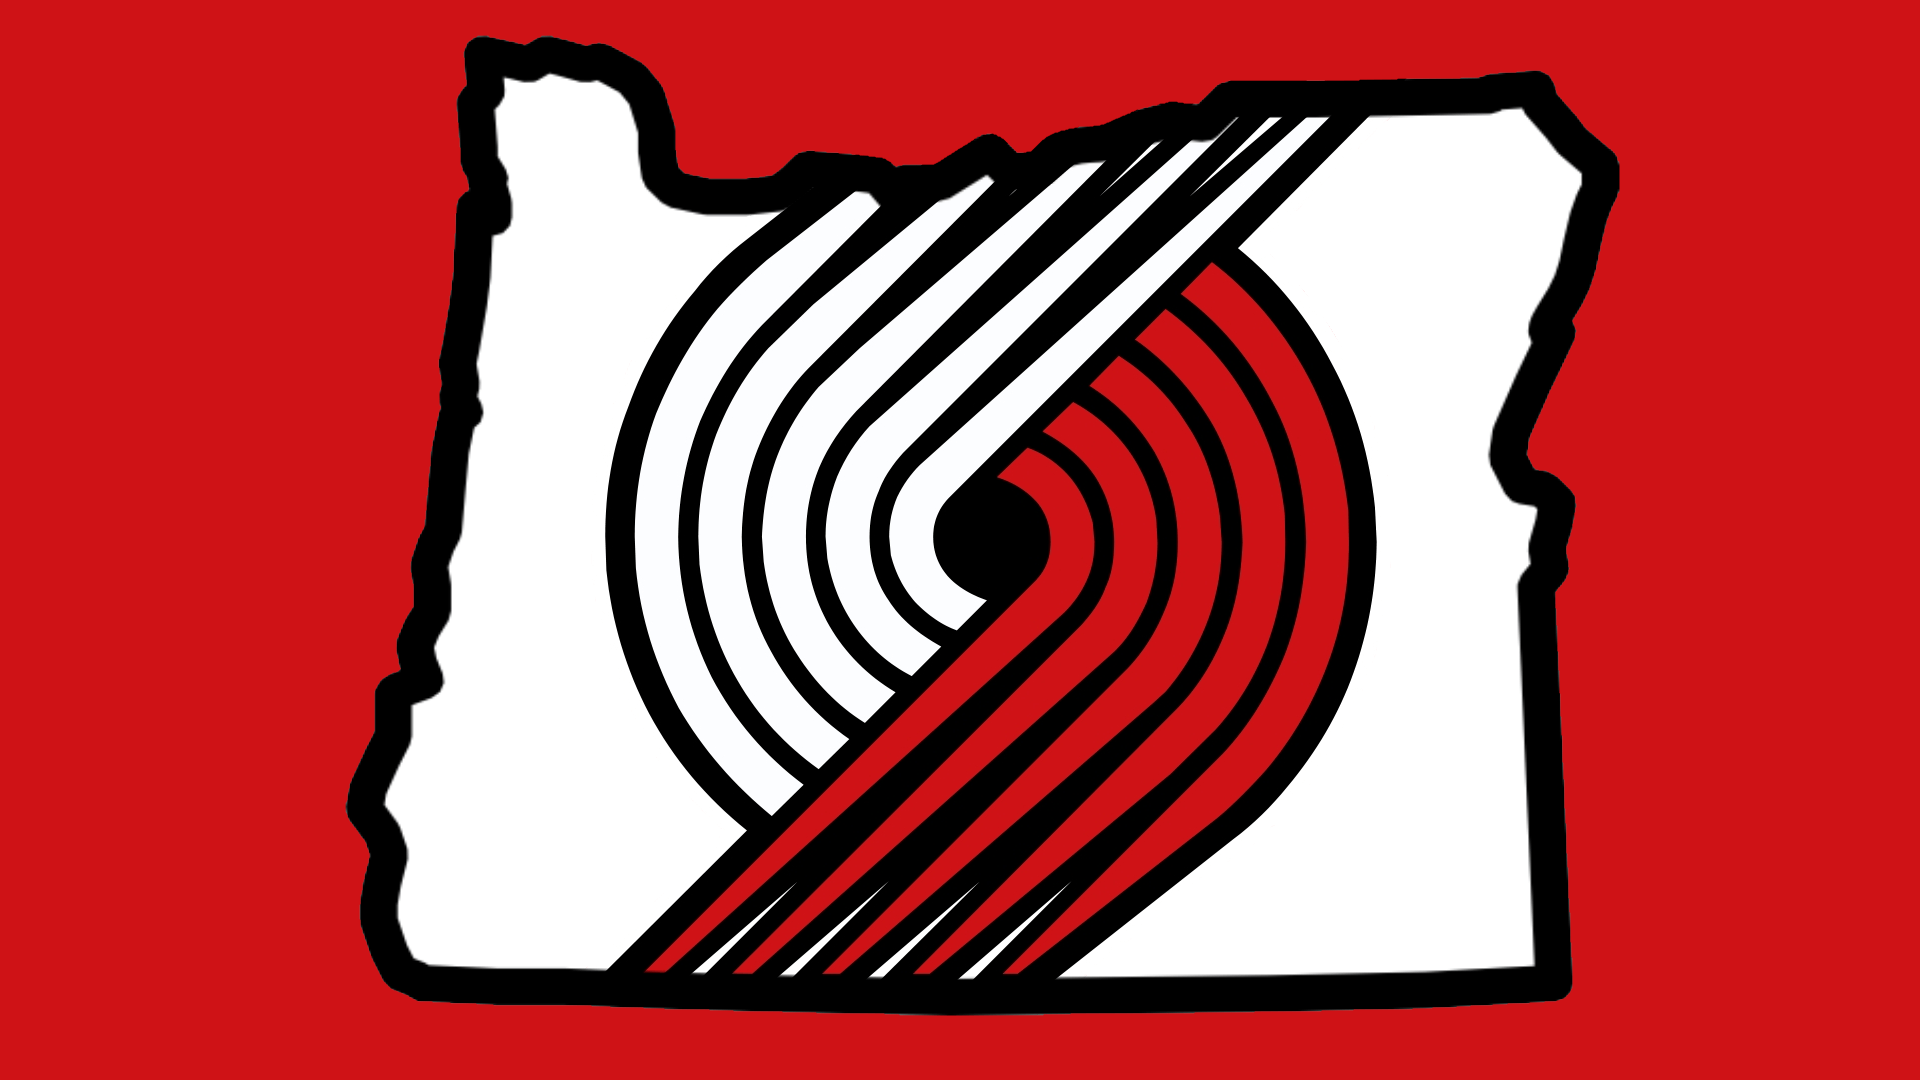 Portland Trail Blazers logo and symbol, meaning, history, PNG